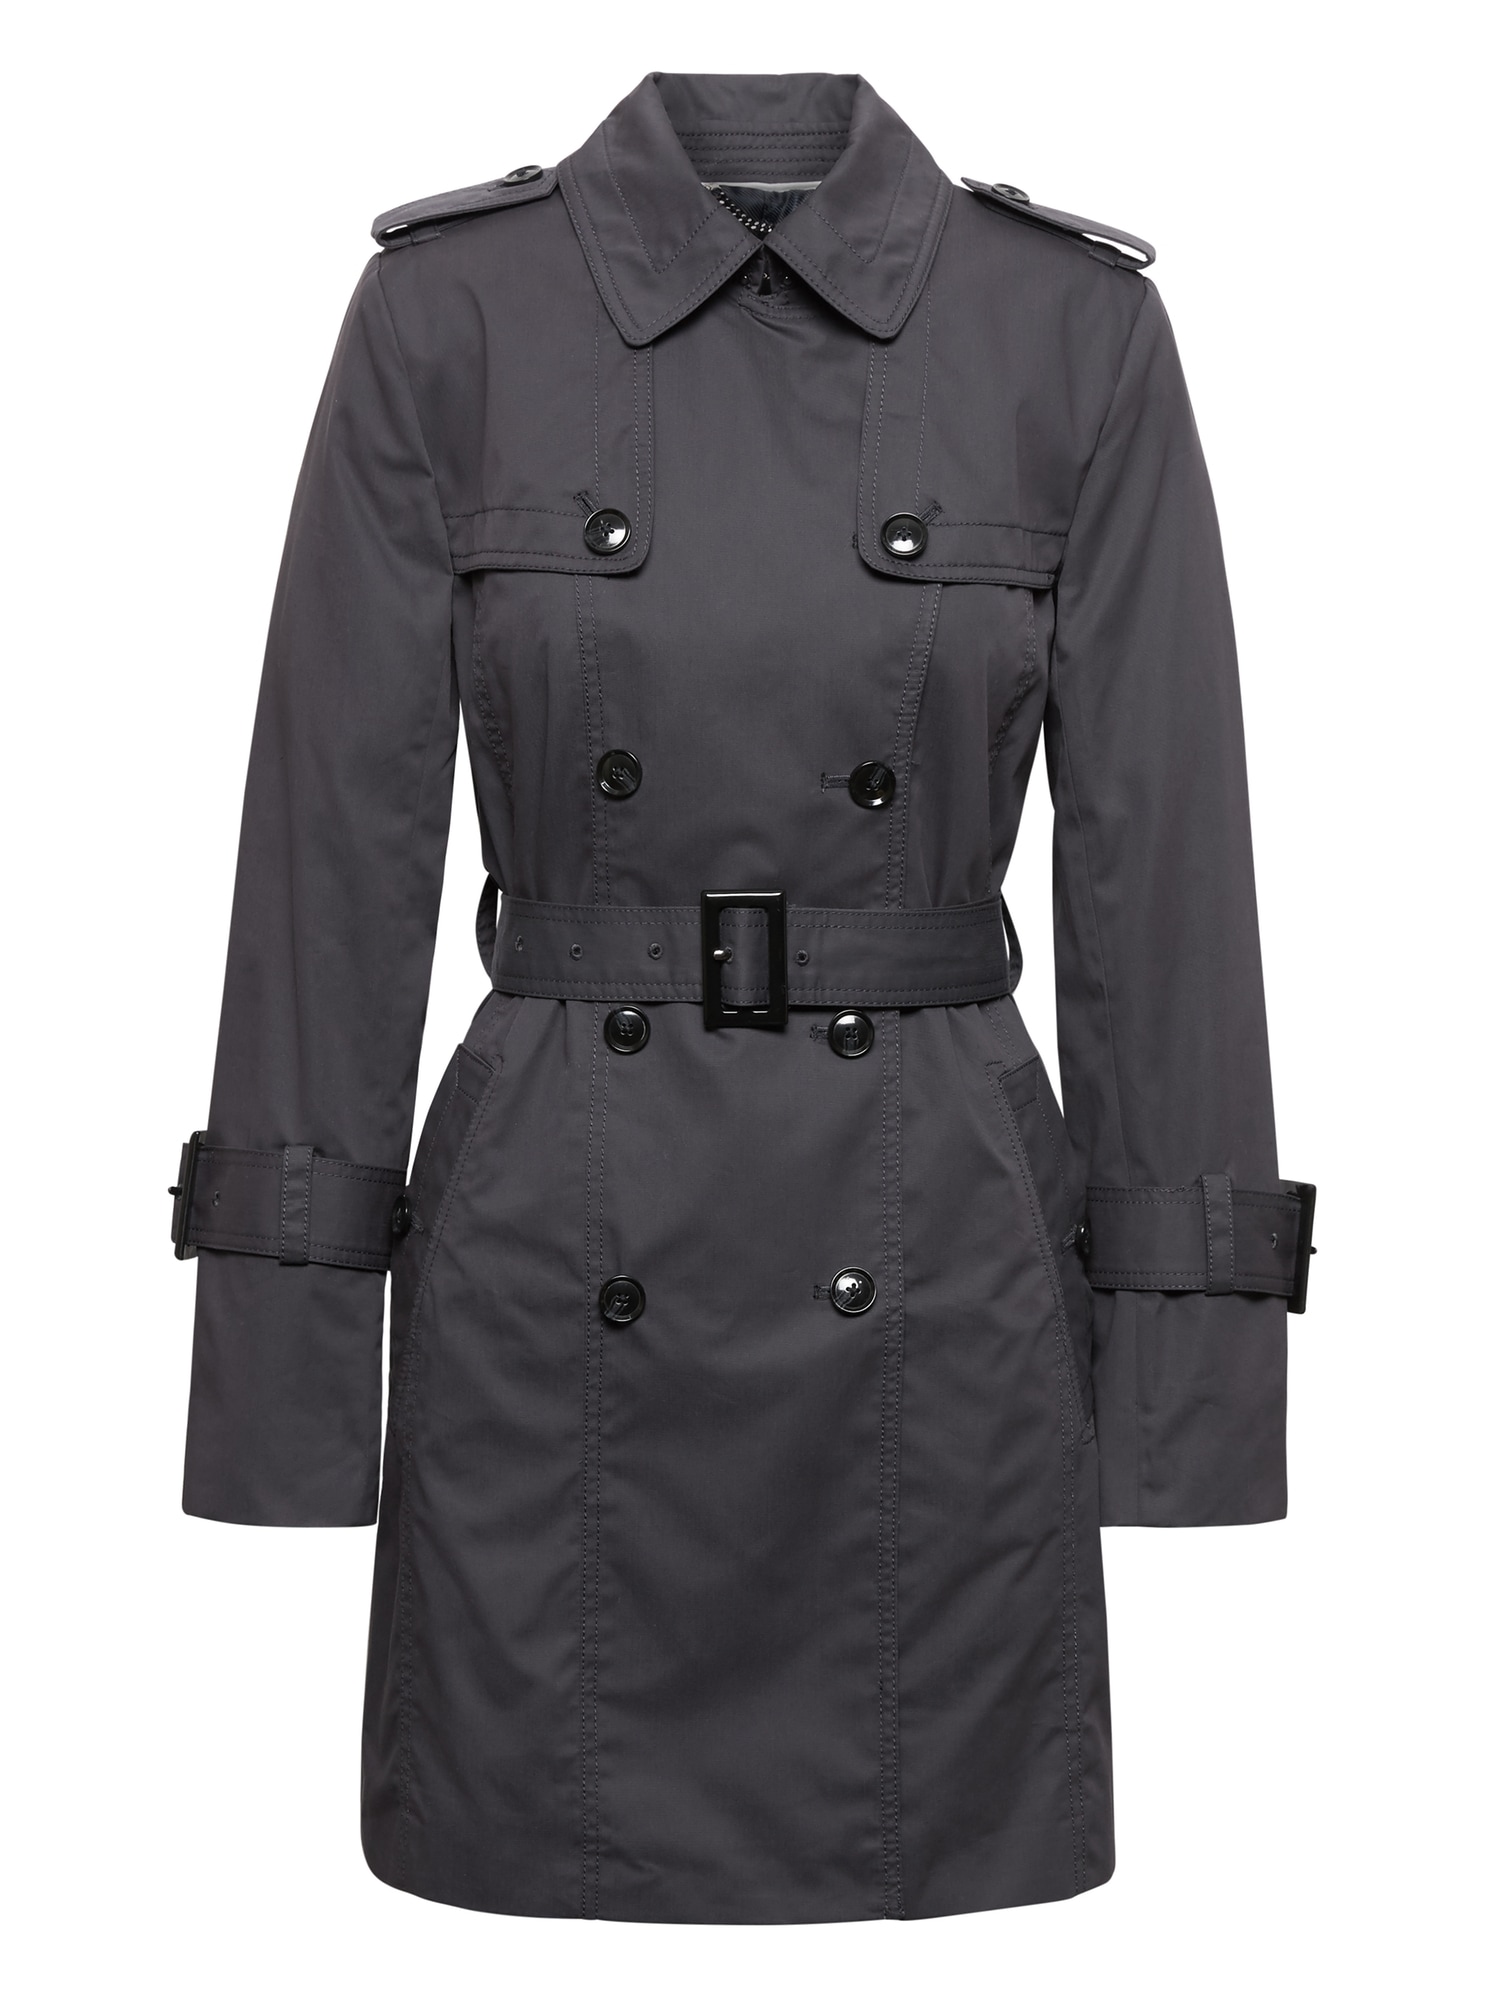 Water-Resistant Classic Trench Coat